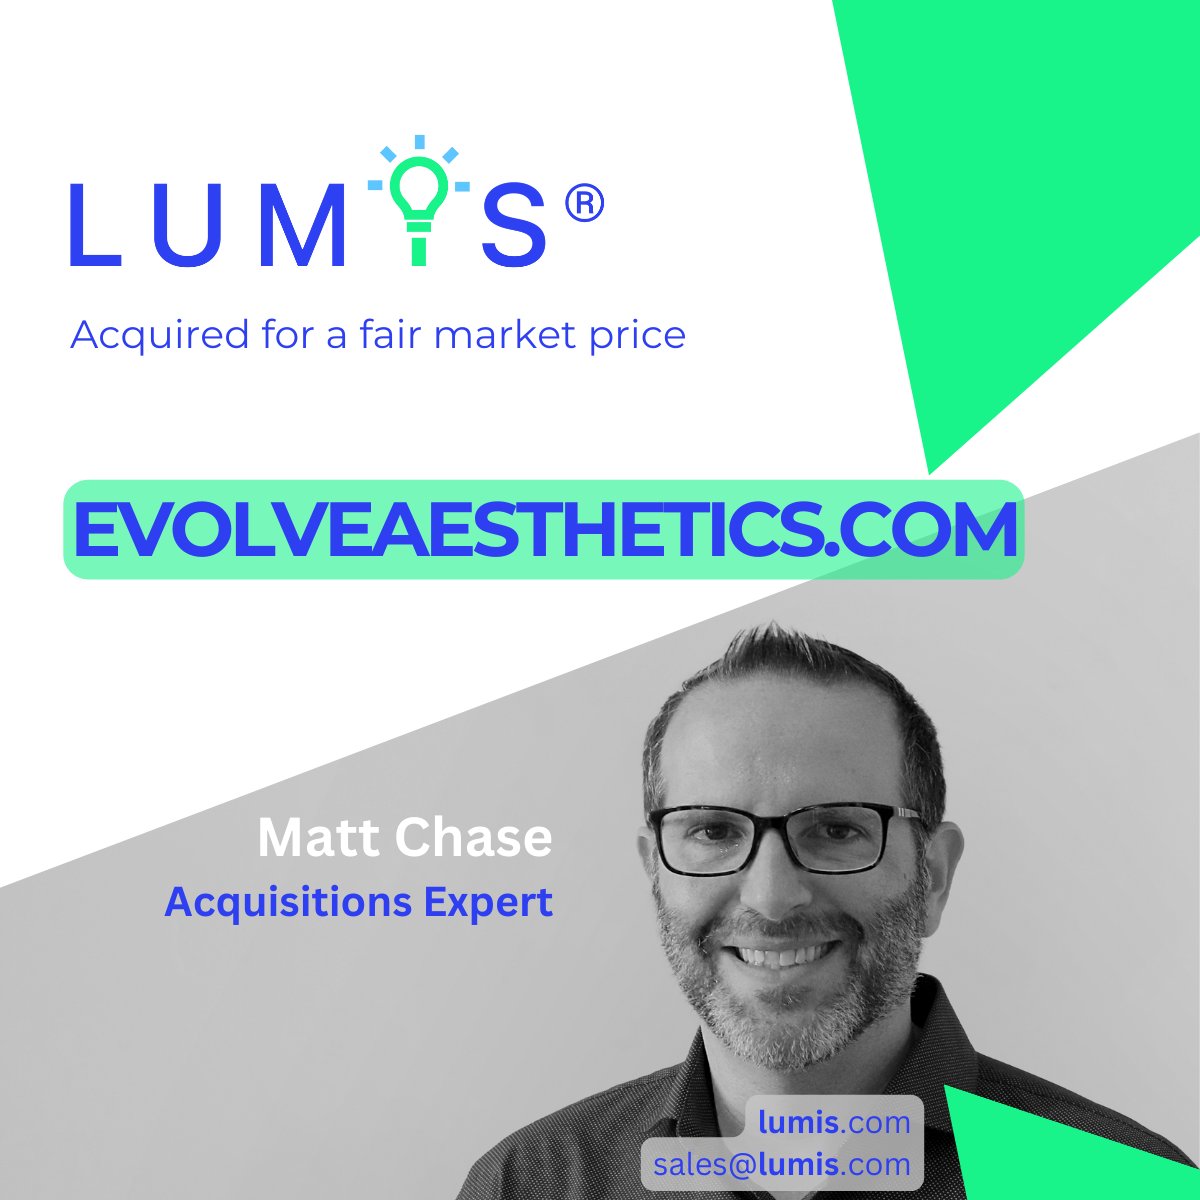 EvolveAesthetics.com has been acquired. Congratulations to Matt, our client, and all parties involved.

#Lumis